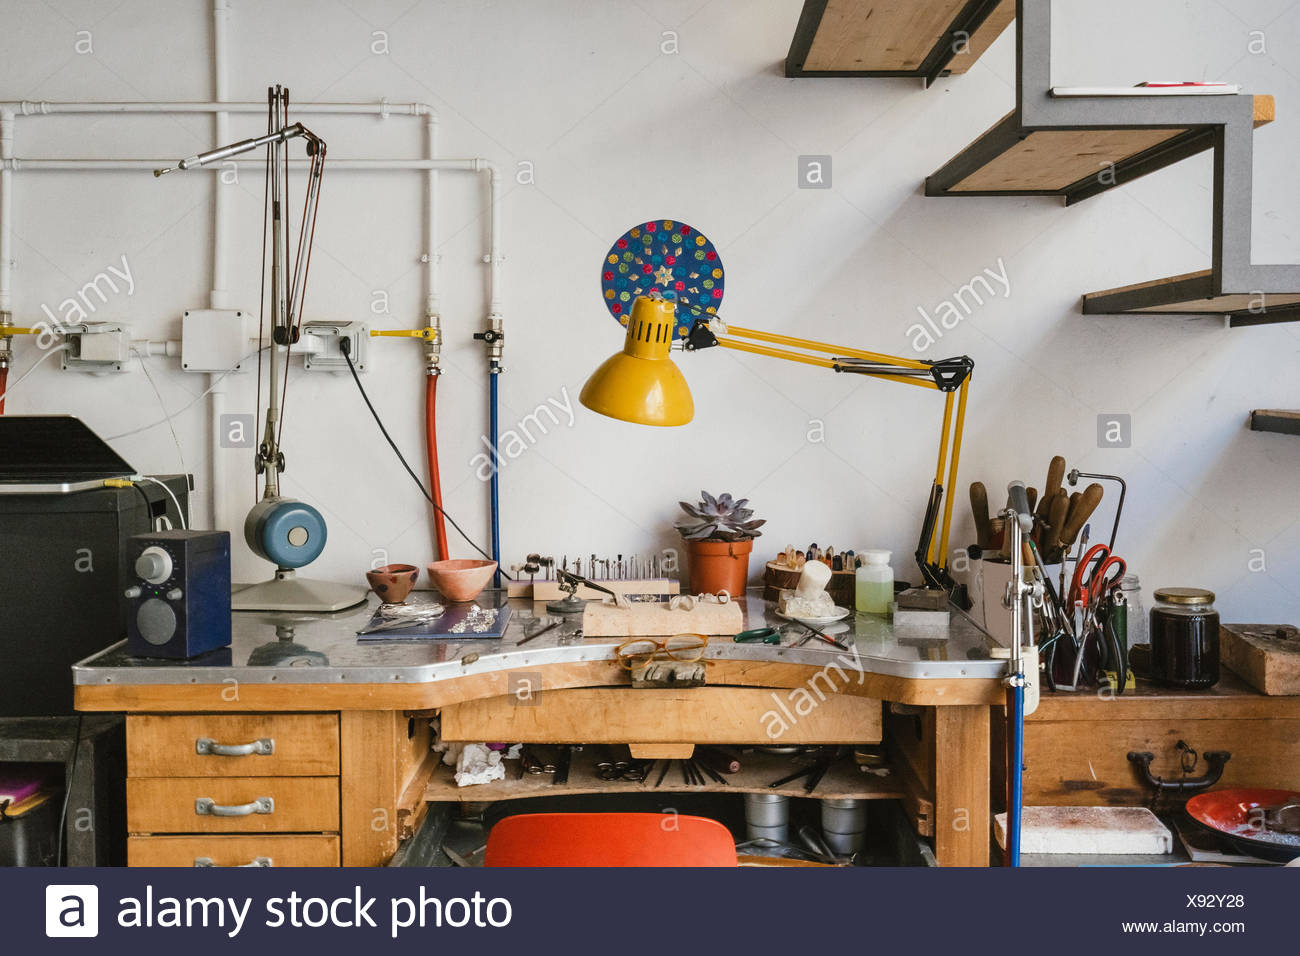 Jewellery Making Equipment And Tools On Jewellery Workshop